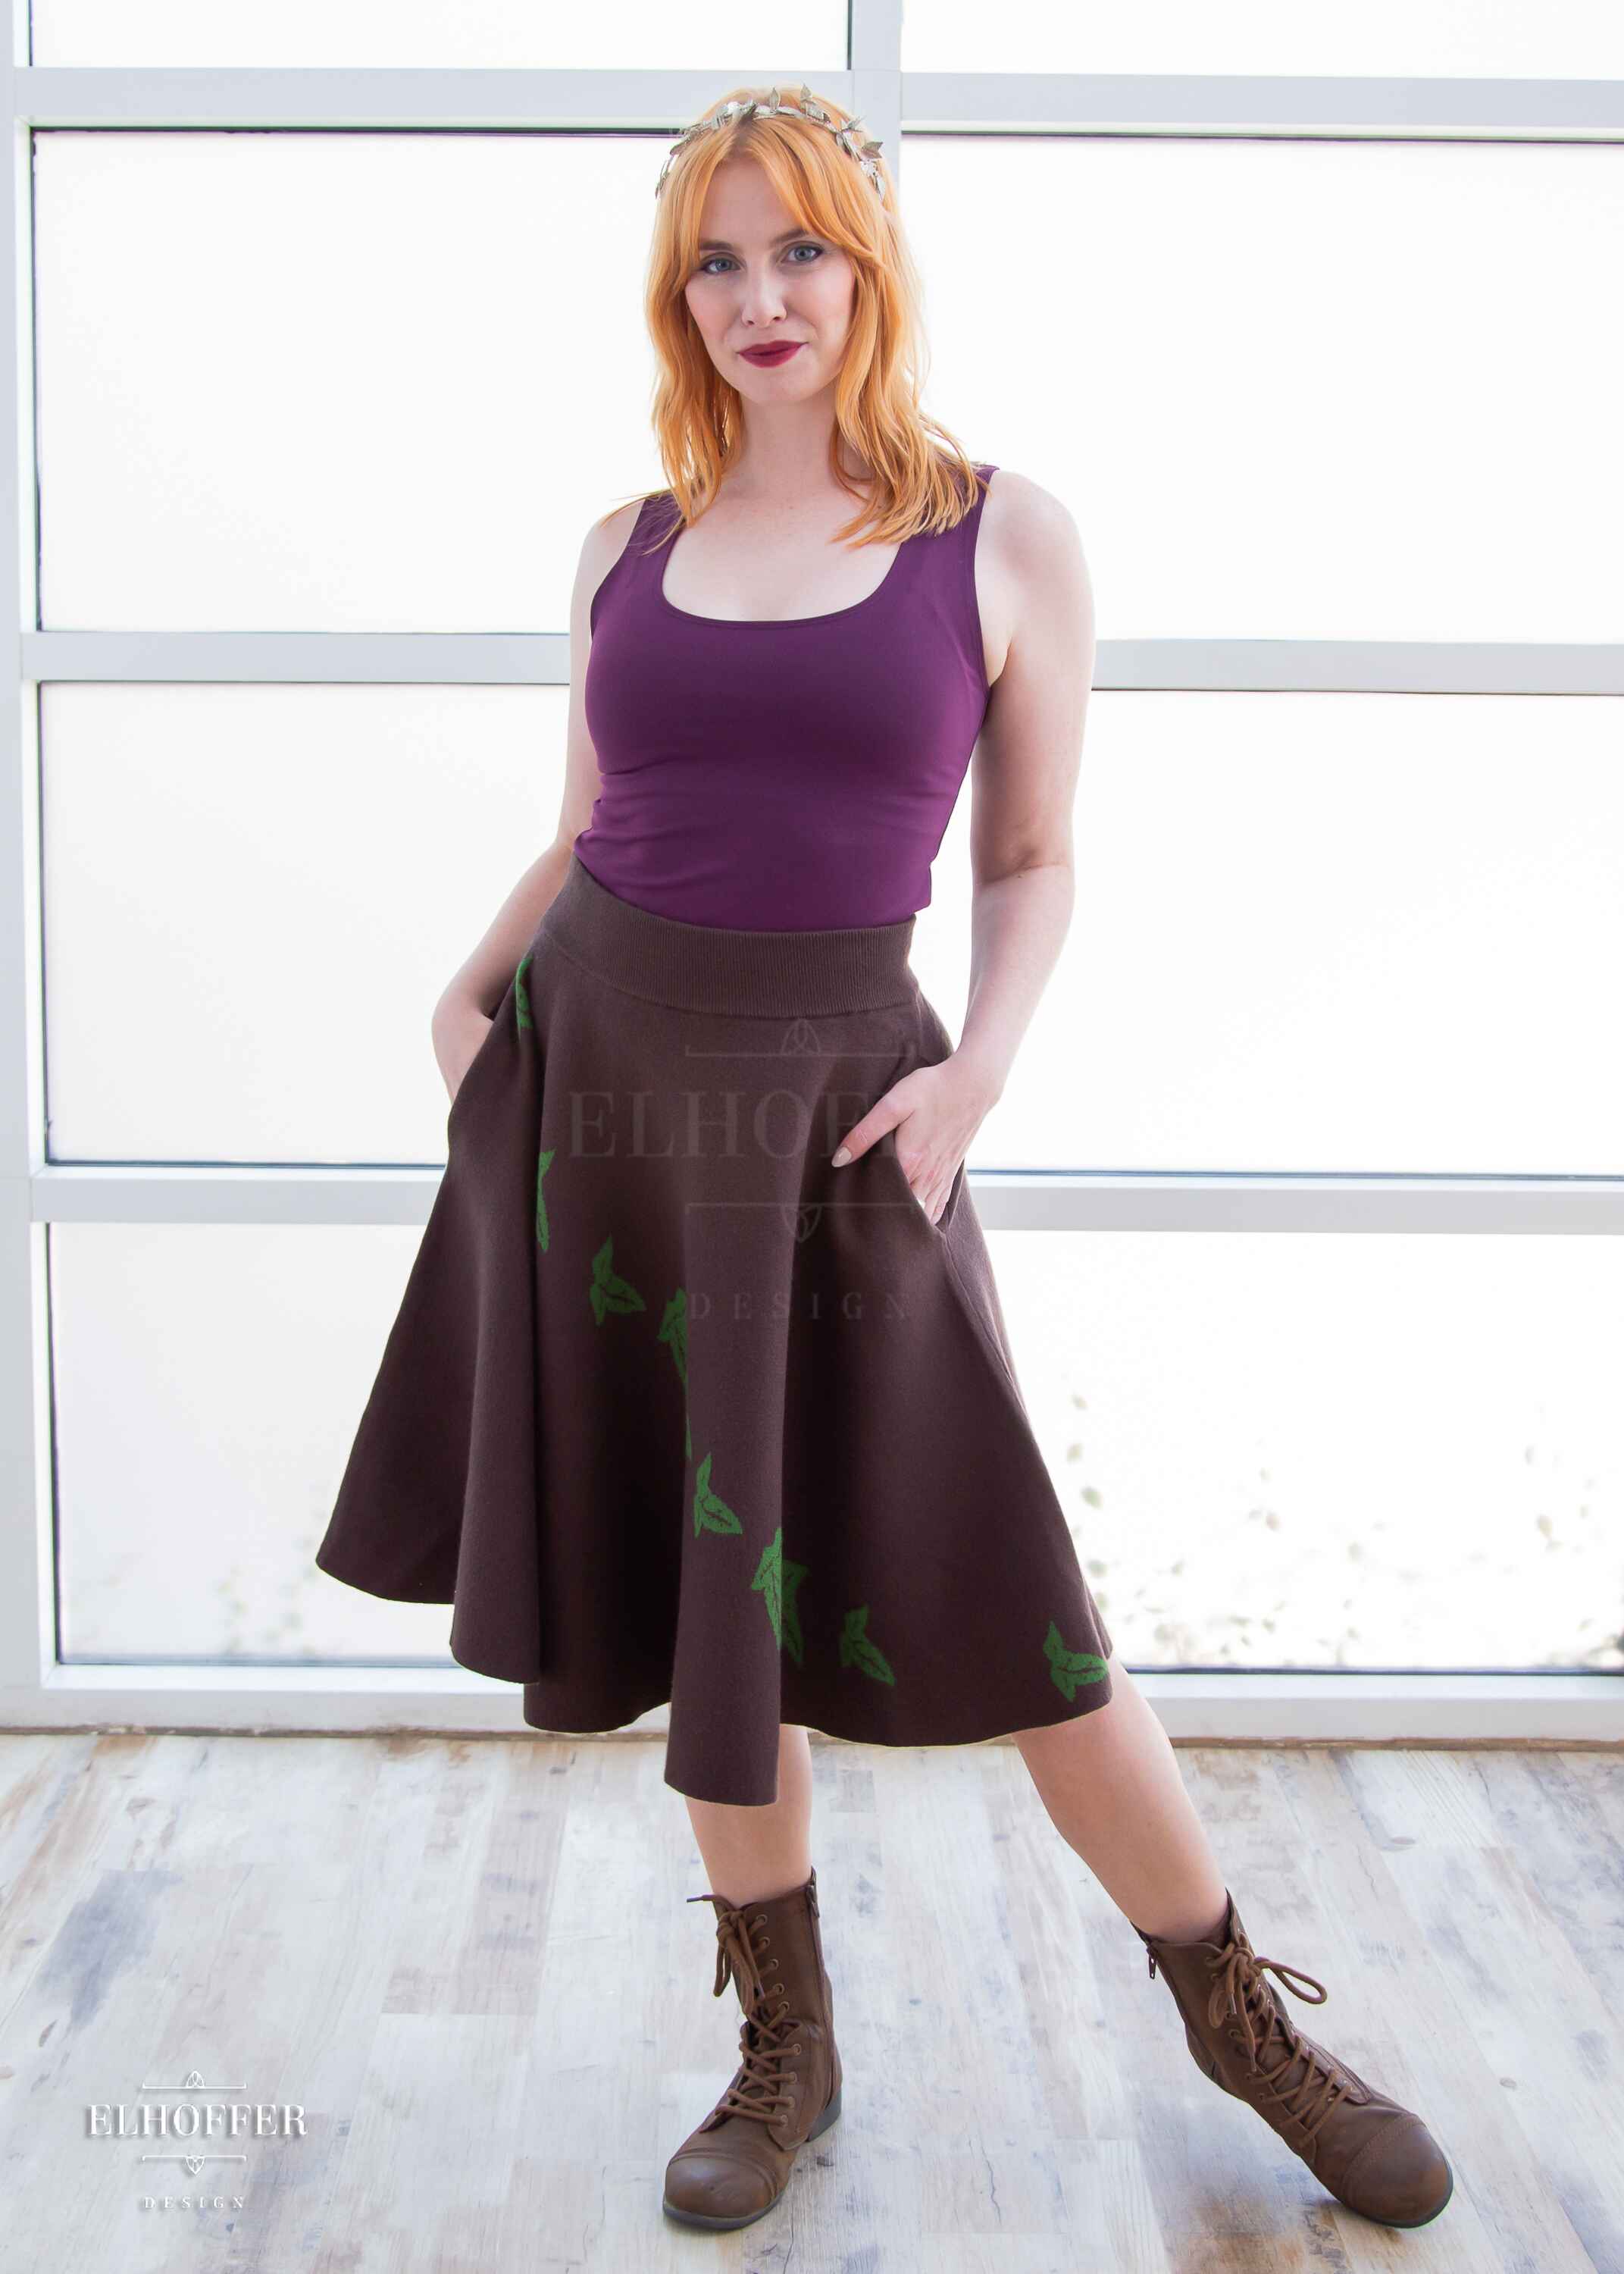 Harley, a fair skinned S model with shoulder length strawberry blonde hair, is wearing a brown knit skirt that hits just passed the knee and has a cascading green leaf design and a dark purple scoop necked crop top.